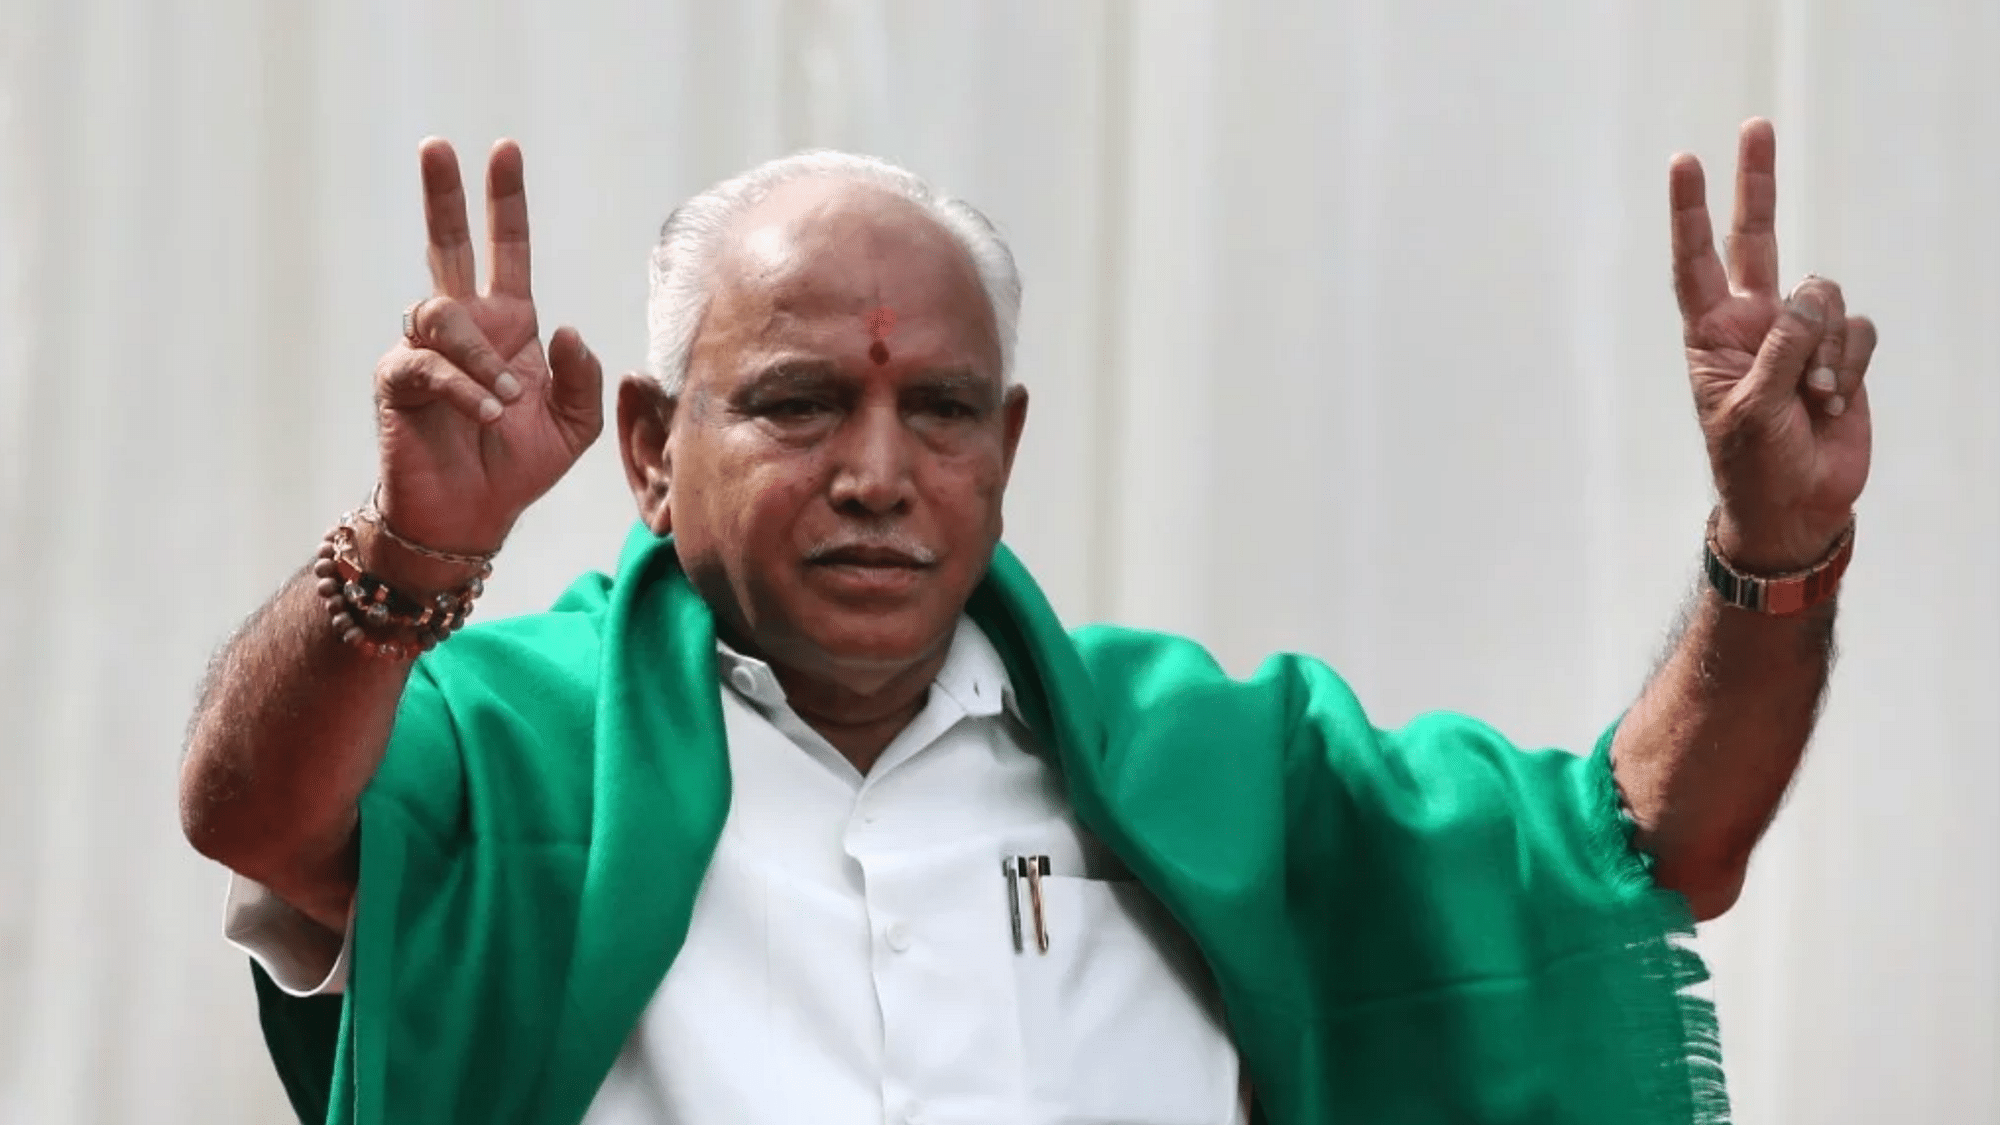 MLA Basanagouda Patil Yatnal alleges that CM Yediyurappa was blackmailed with a secret CD. Image used for representation.